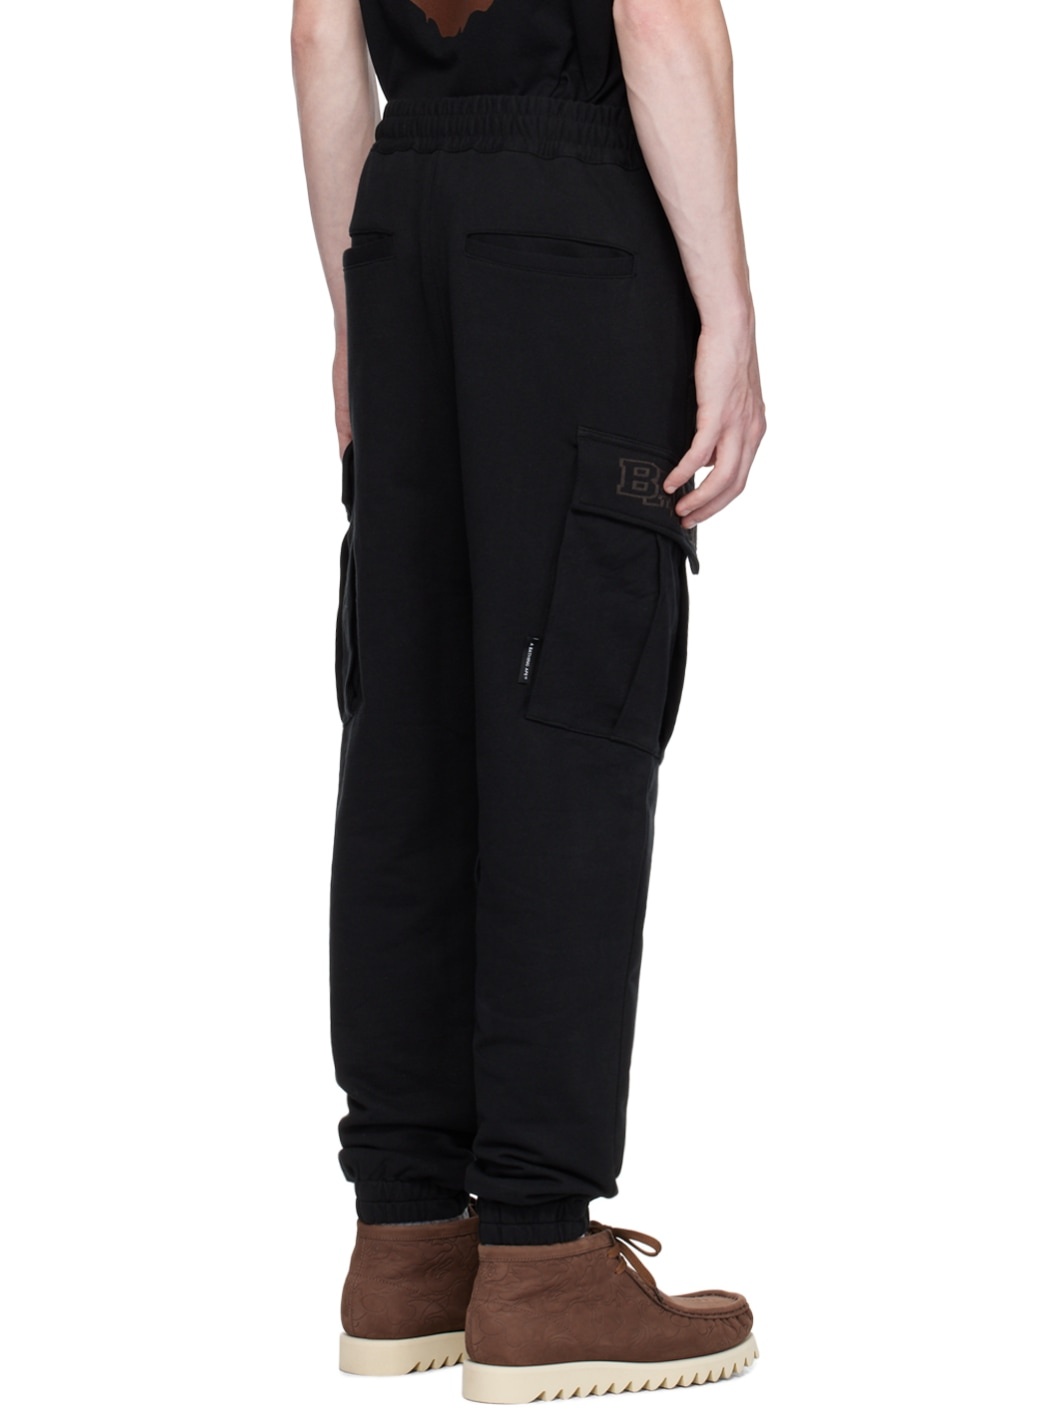 Black Relaxed Fit Cargo Pants - 3